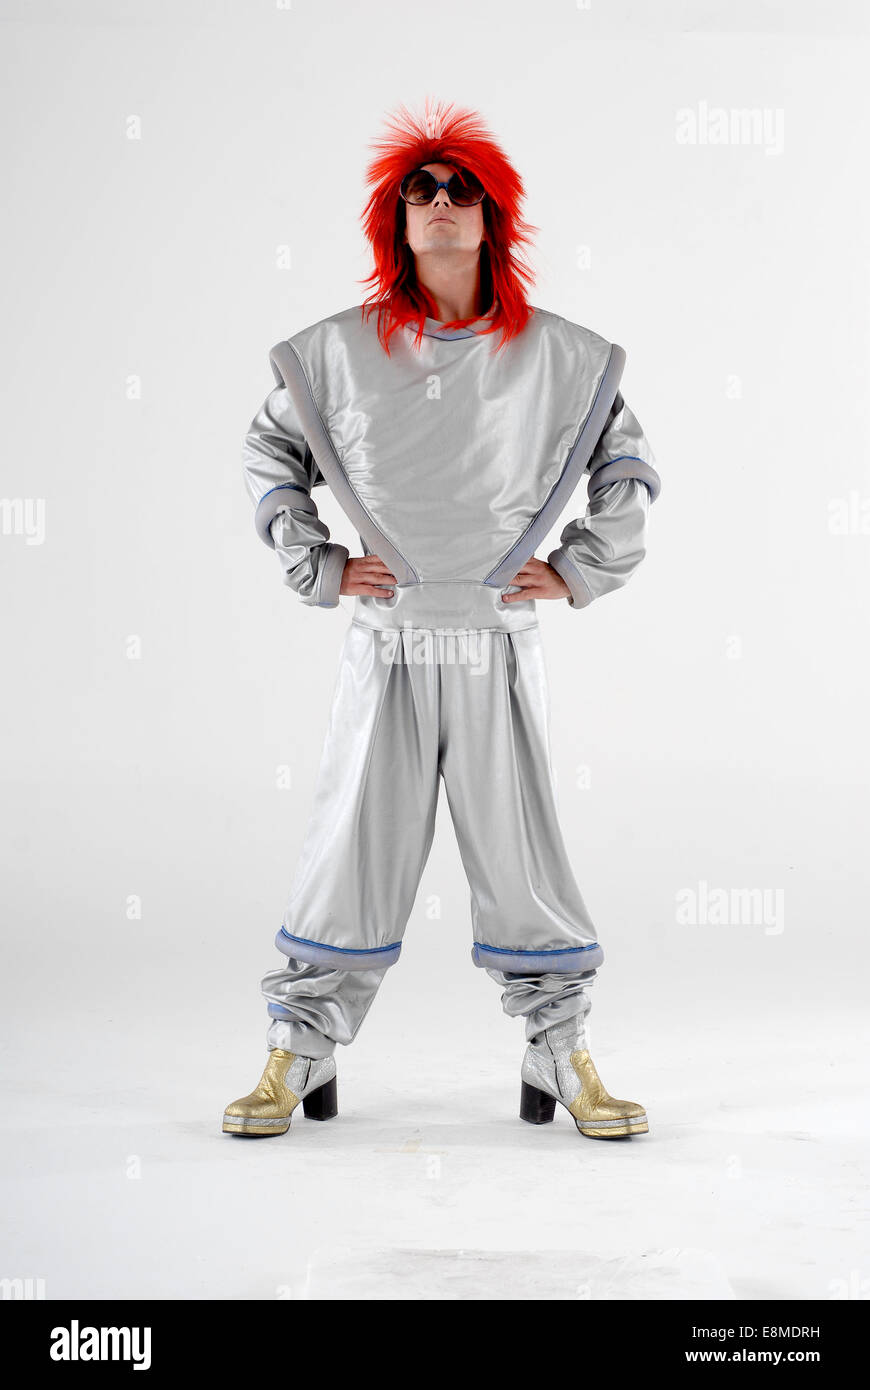 man in fancy dress, comedy costume as a ziggy stardust david bowie, space  age character, with shiny silver suit, wig & platforms Stock Photo - Alamy